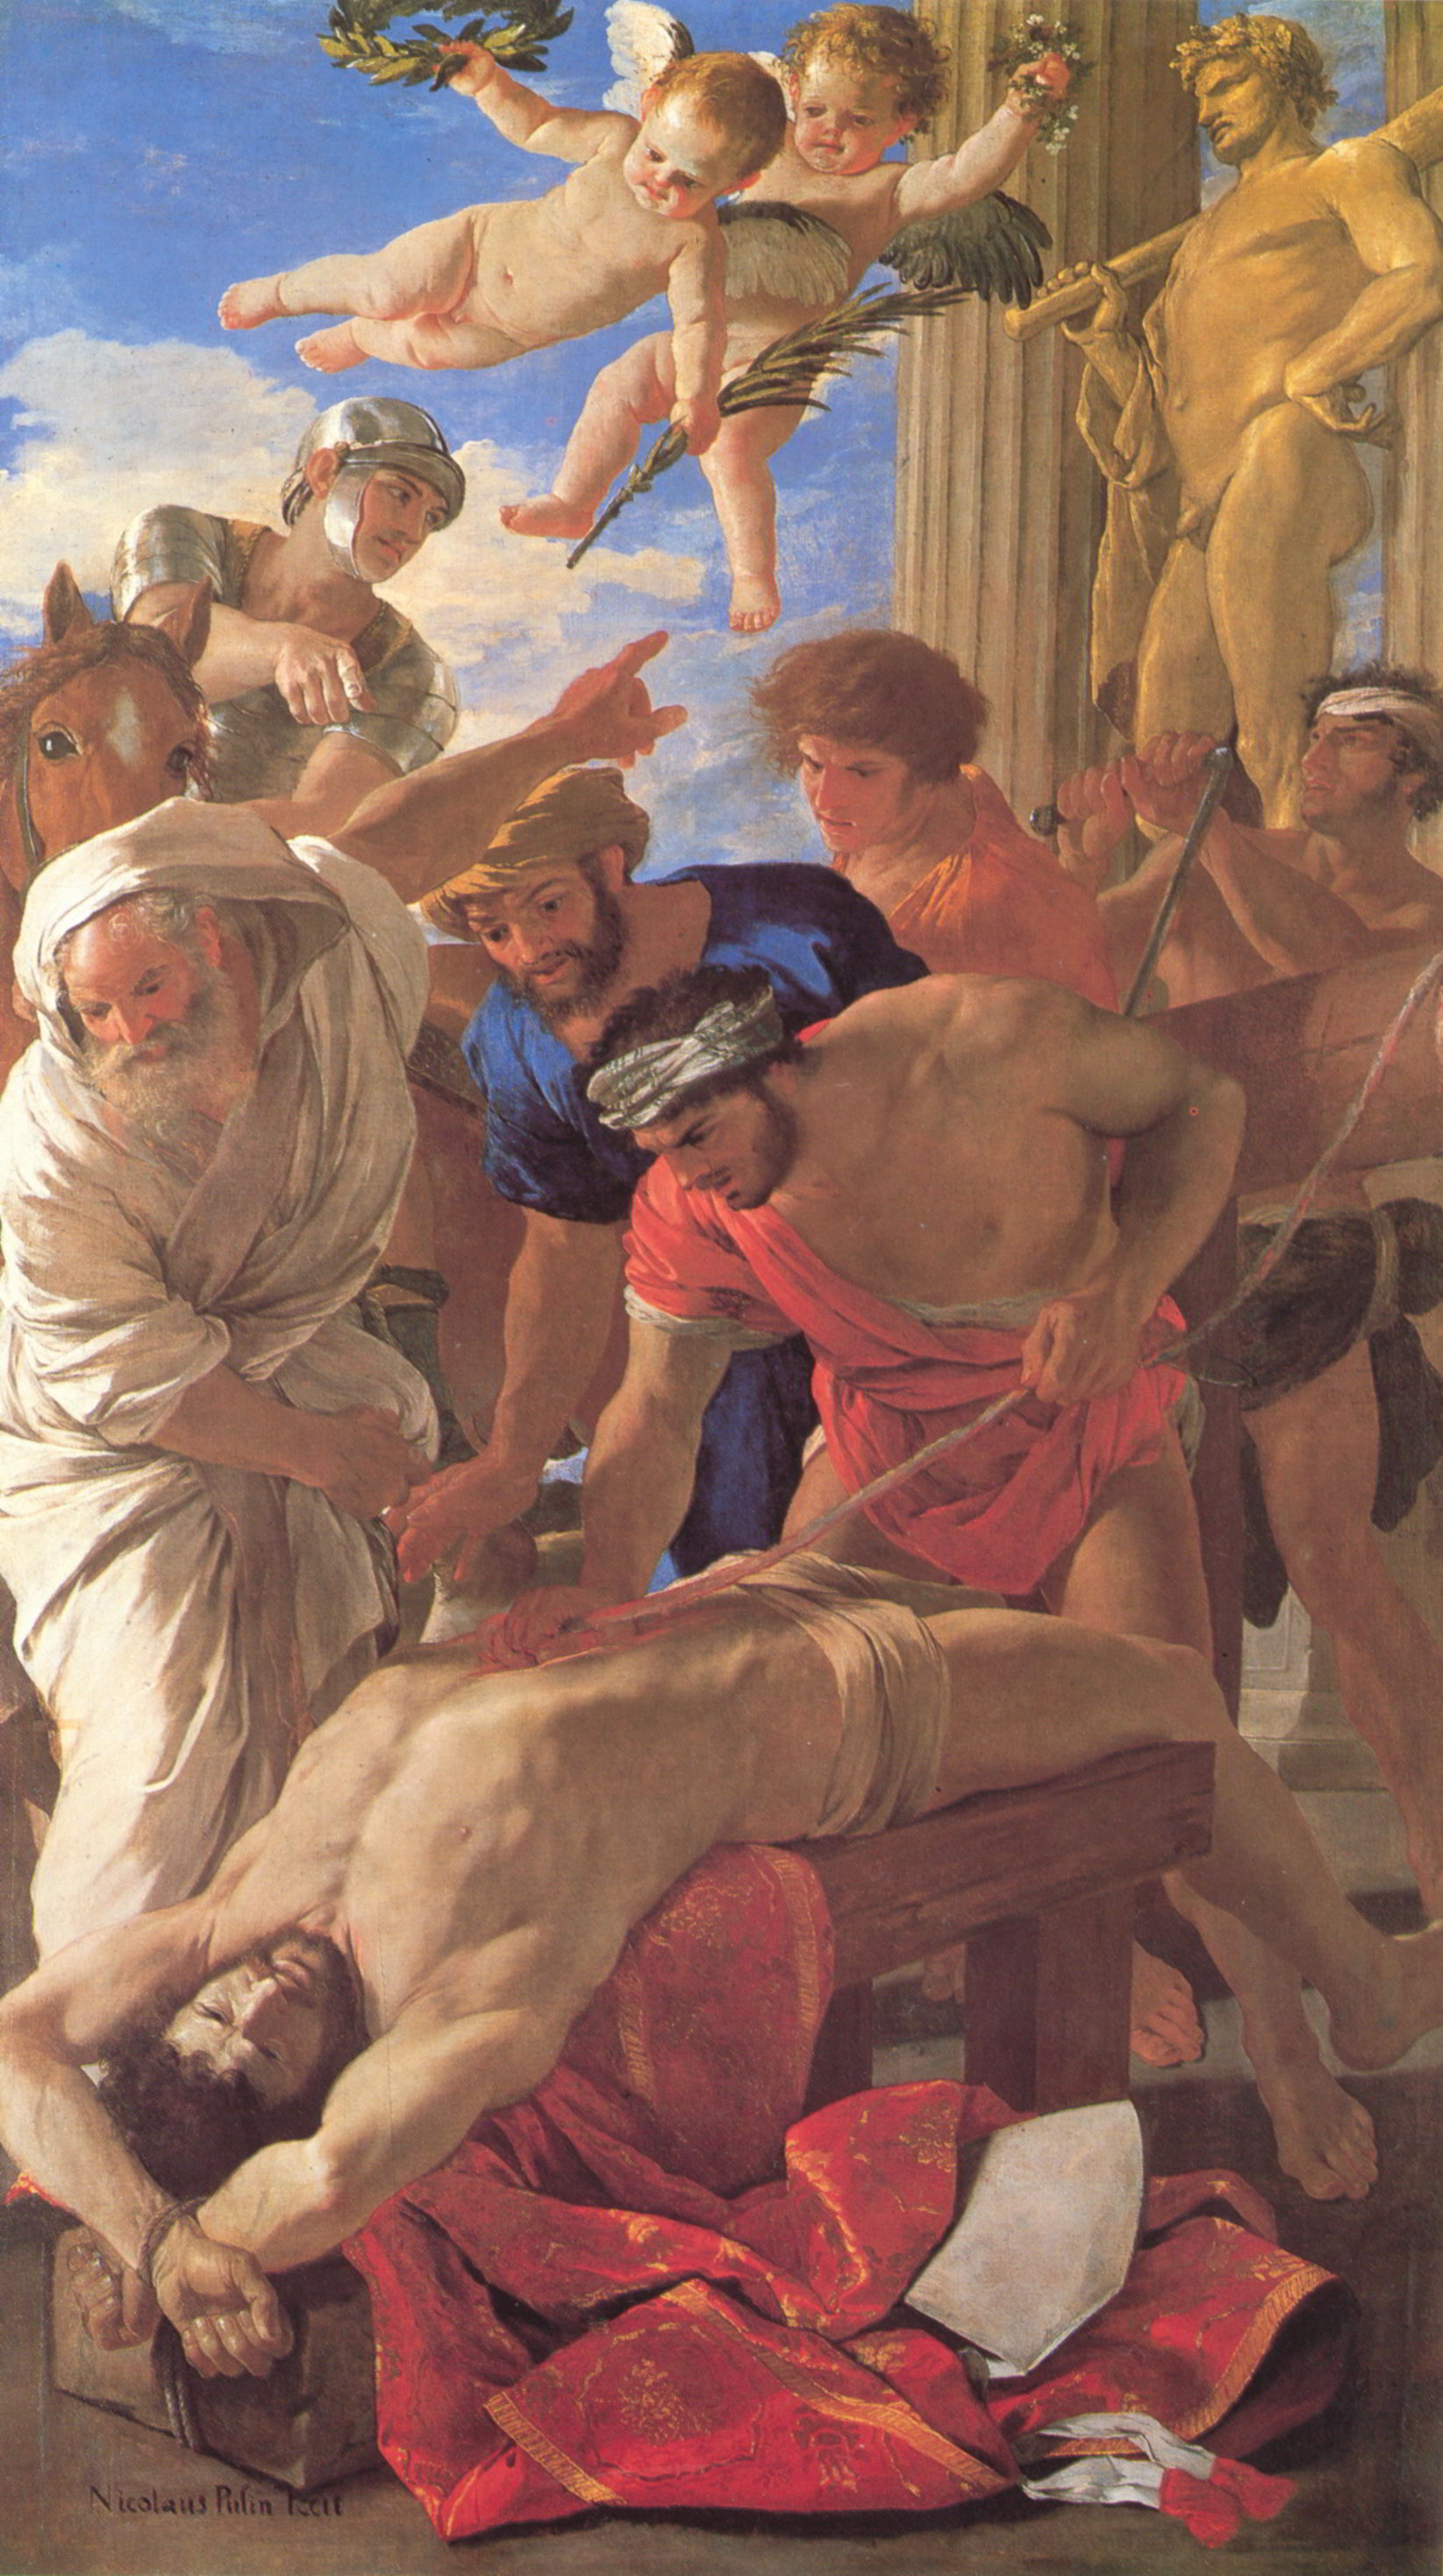 The Martyrdom of St Erasmus by Nicolas Poussin